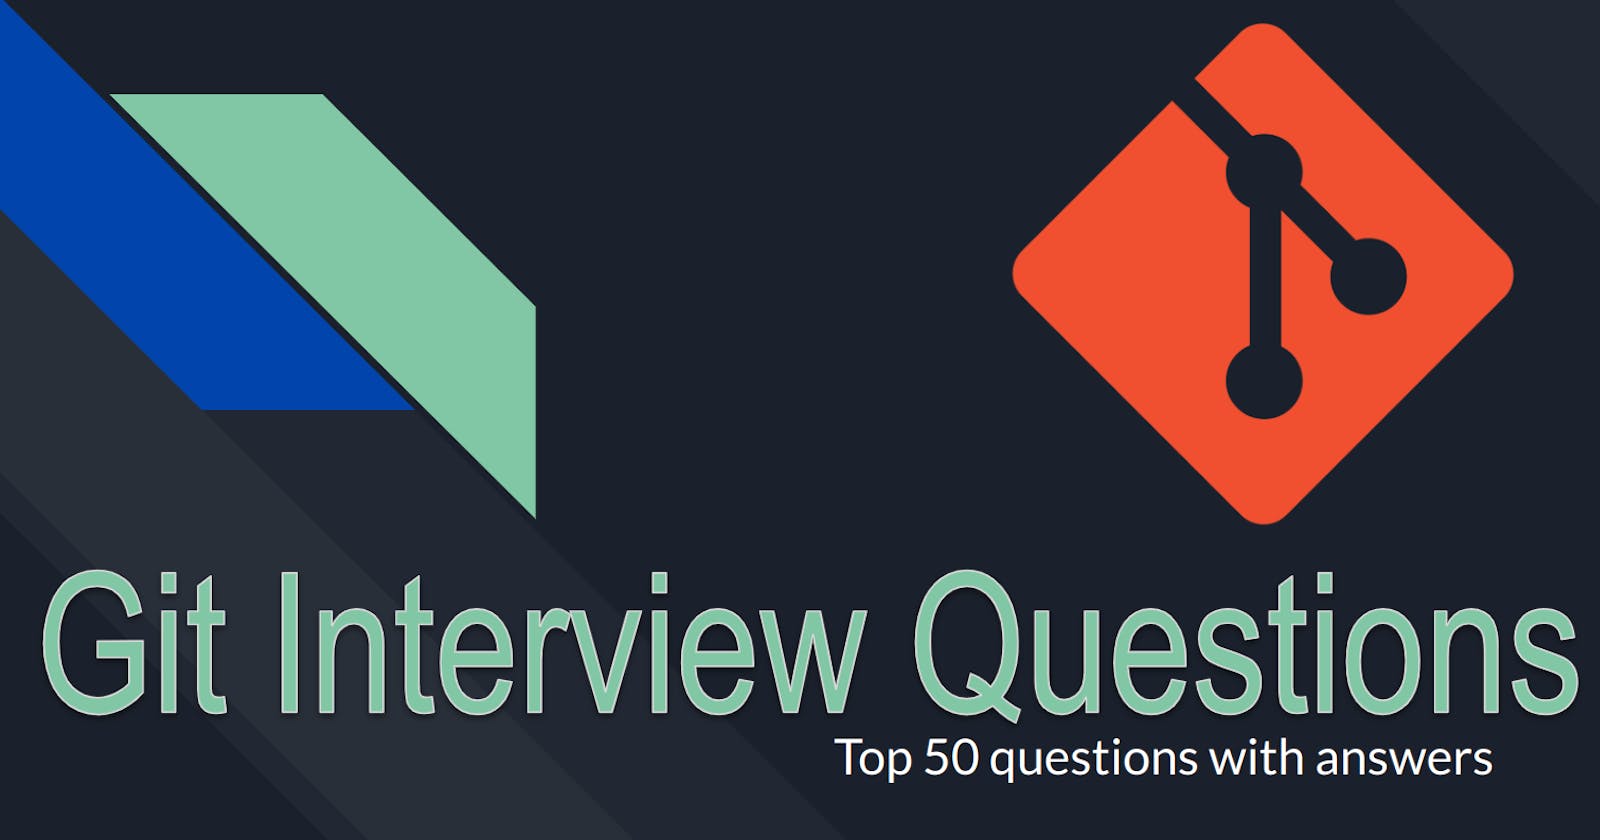 Day 83: Git Interview Questions